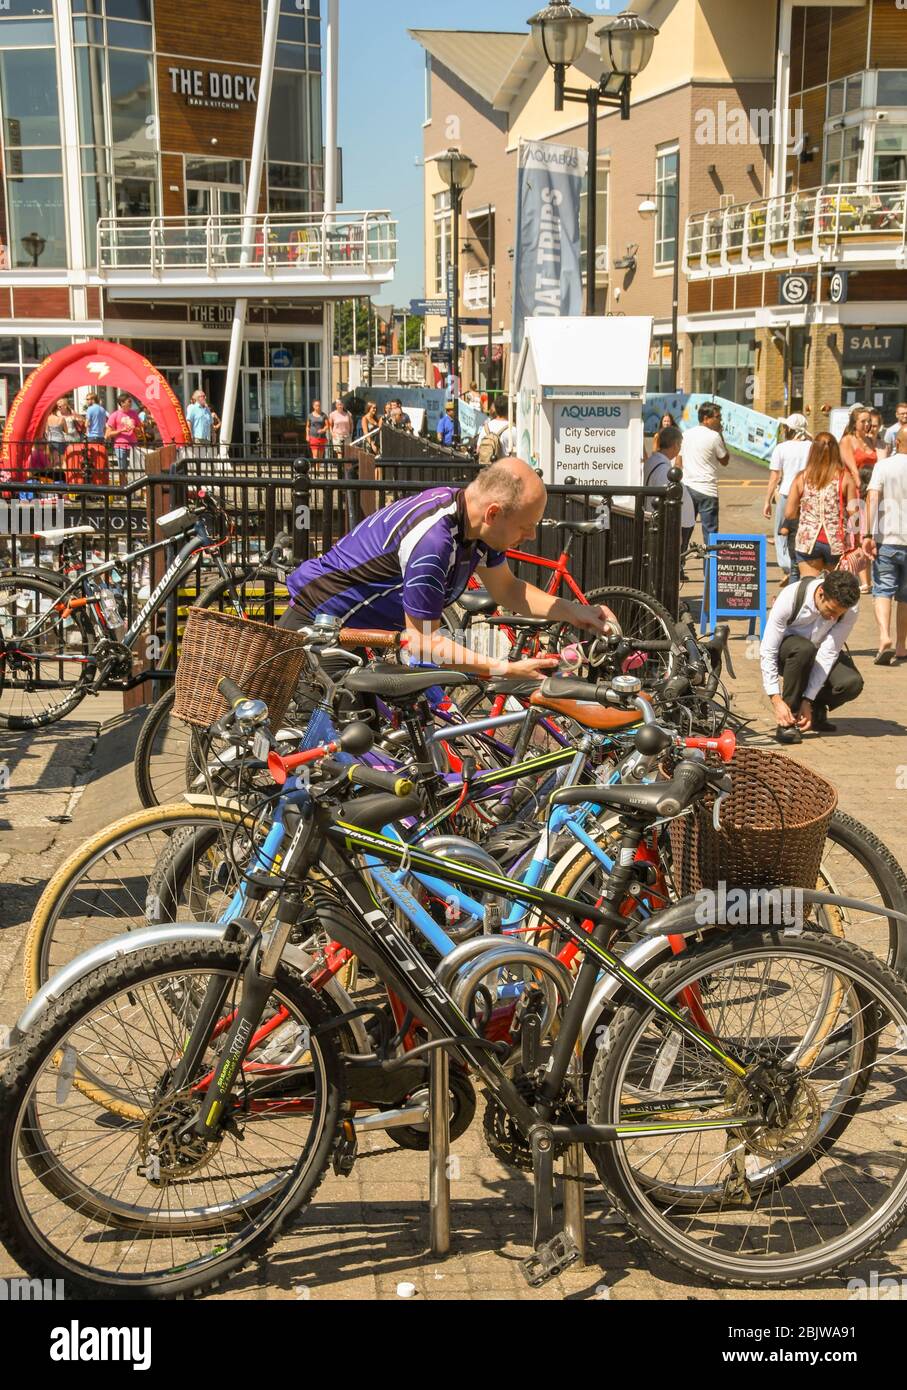 CARDIFF BAY, CARDIFF, WALES - JULY 2018: Cyclist securing his bicycle to a cycle rack with other bikes in Cardiff Bay Stock Photo